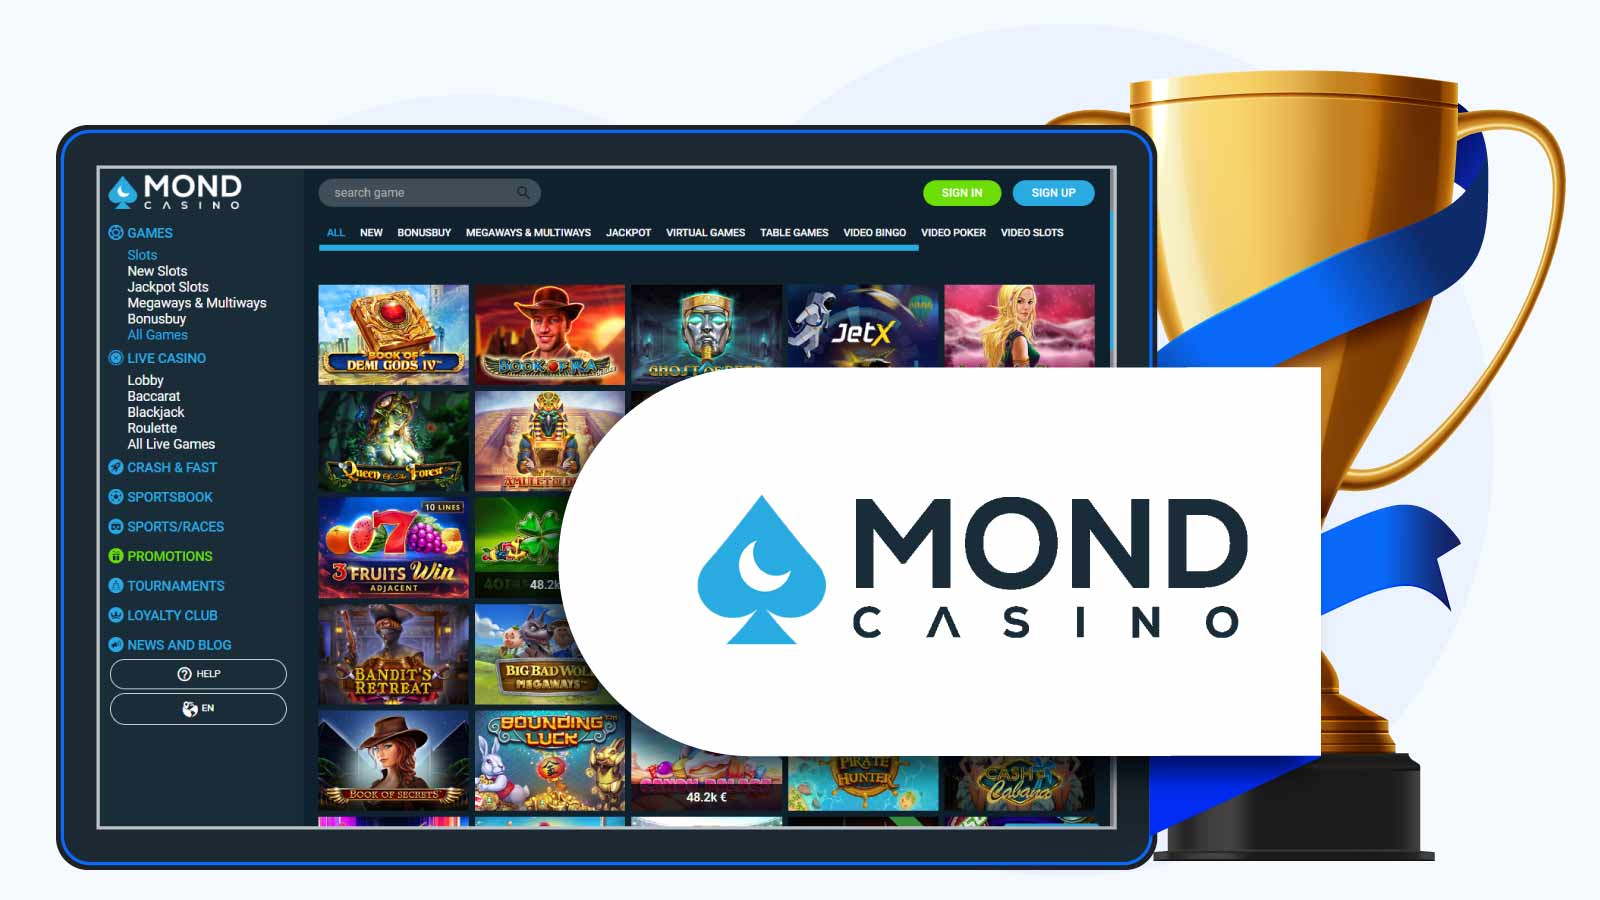 Mond Casino — Best for quality promotions